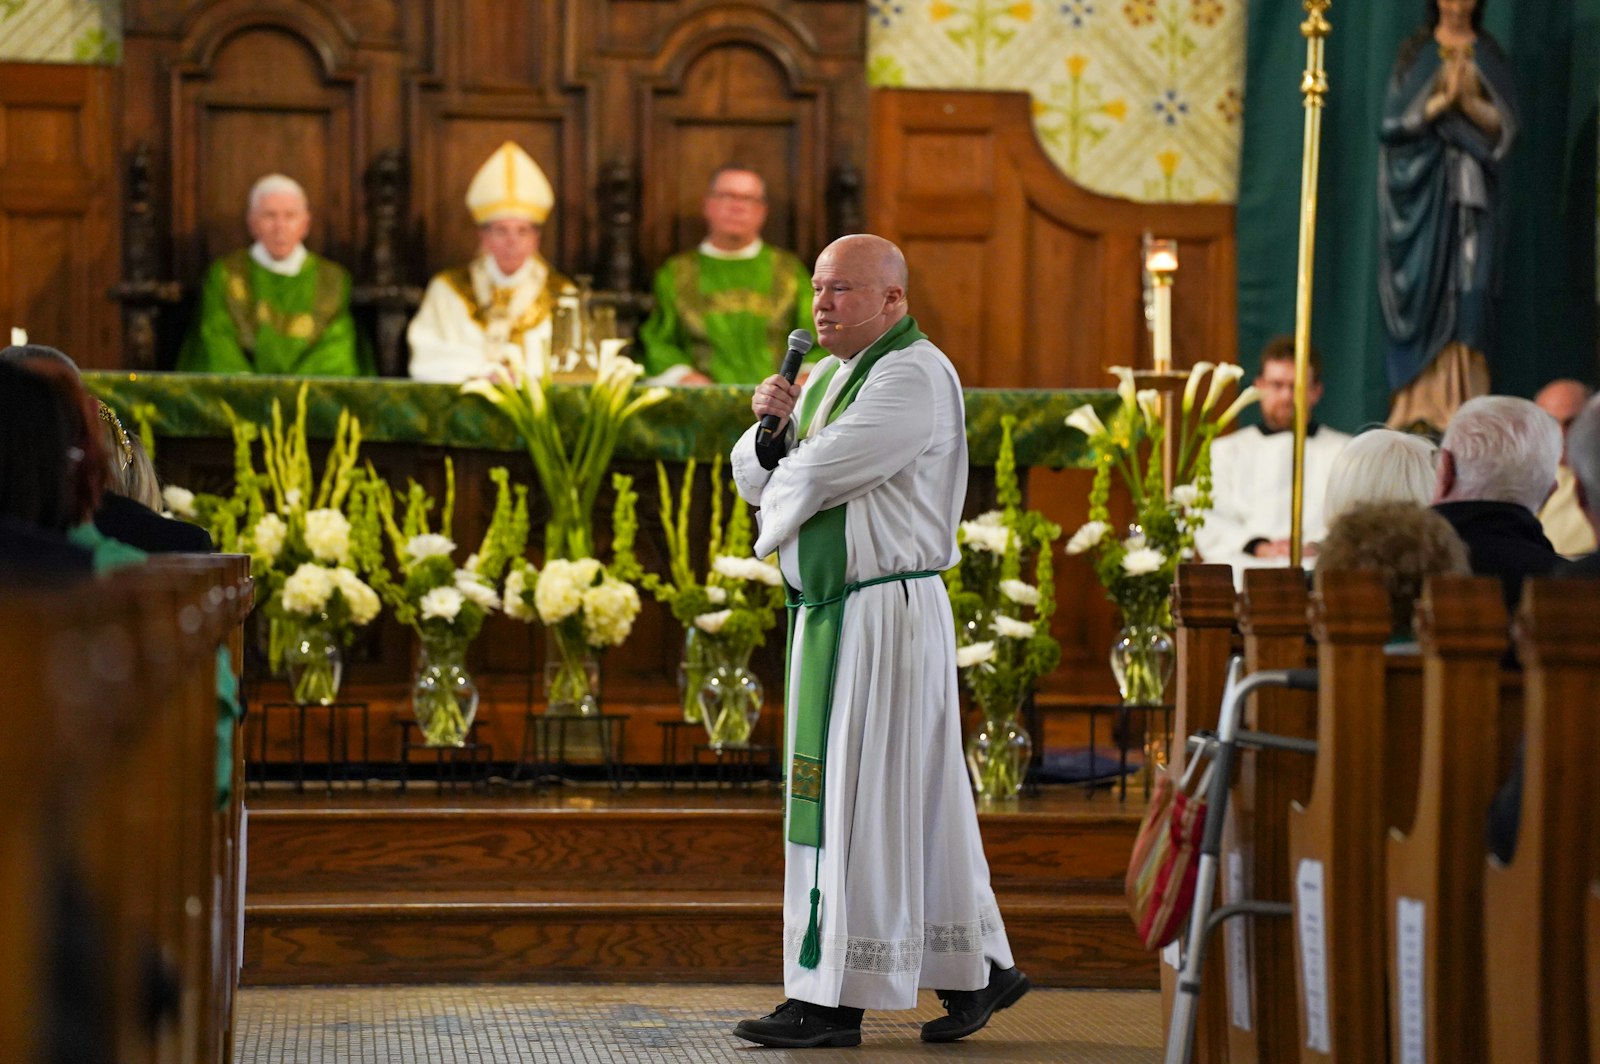 In his homily, Fr. James Livingston, who is of Irish descent and serves as chaplain at Ascension hospitals in Novi and Southfield, recounted the story of St. Patrick in conjunction with the day’s Gospel message.